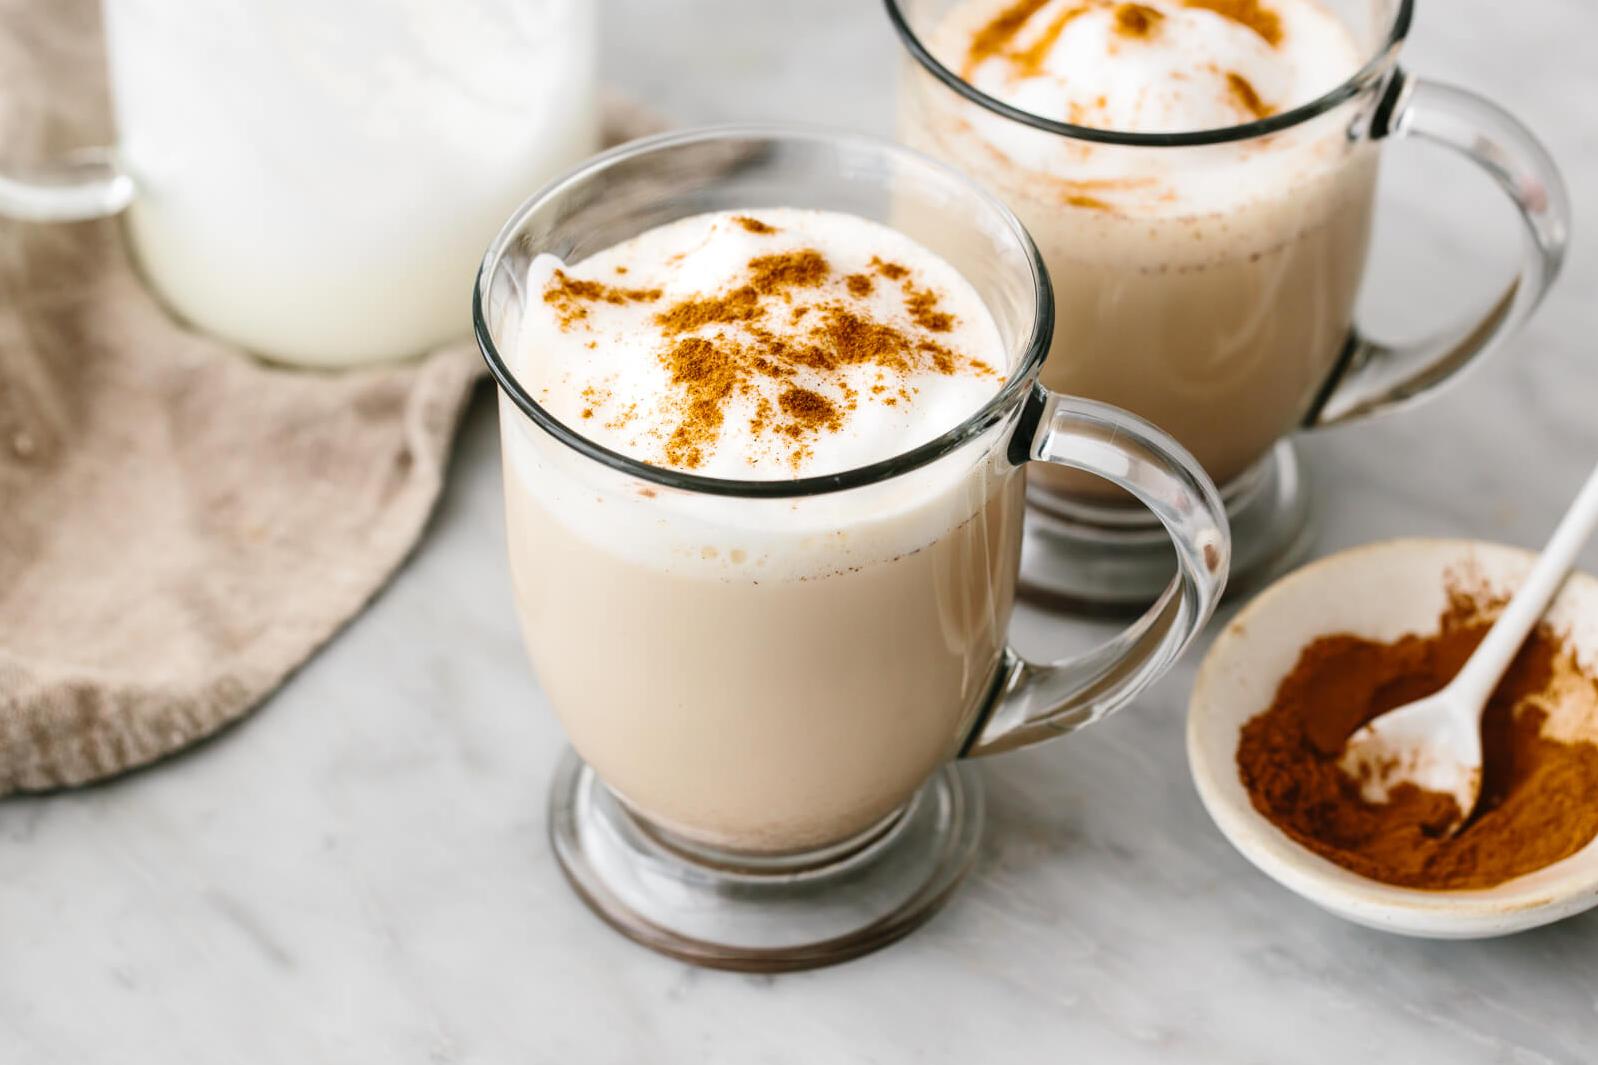  A perfectly frothy Chai with a sprinkle of cinnamon on top.